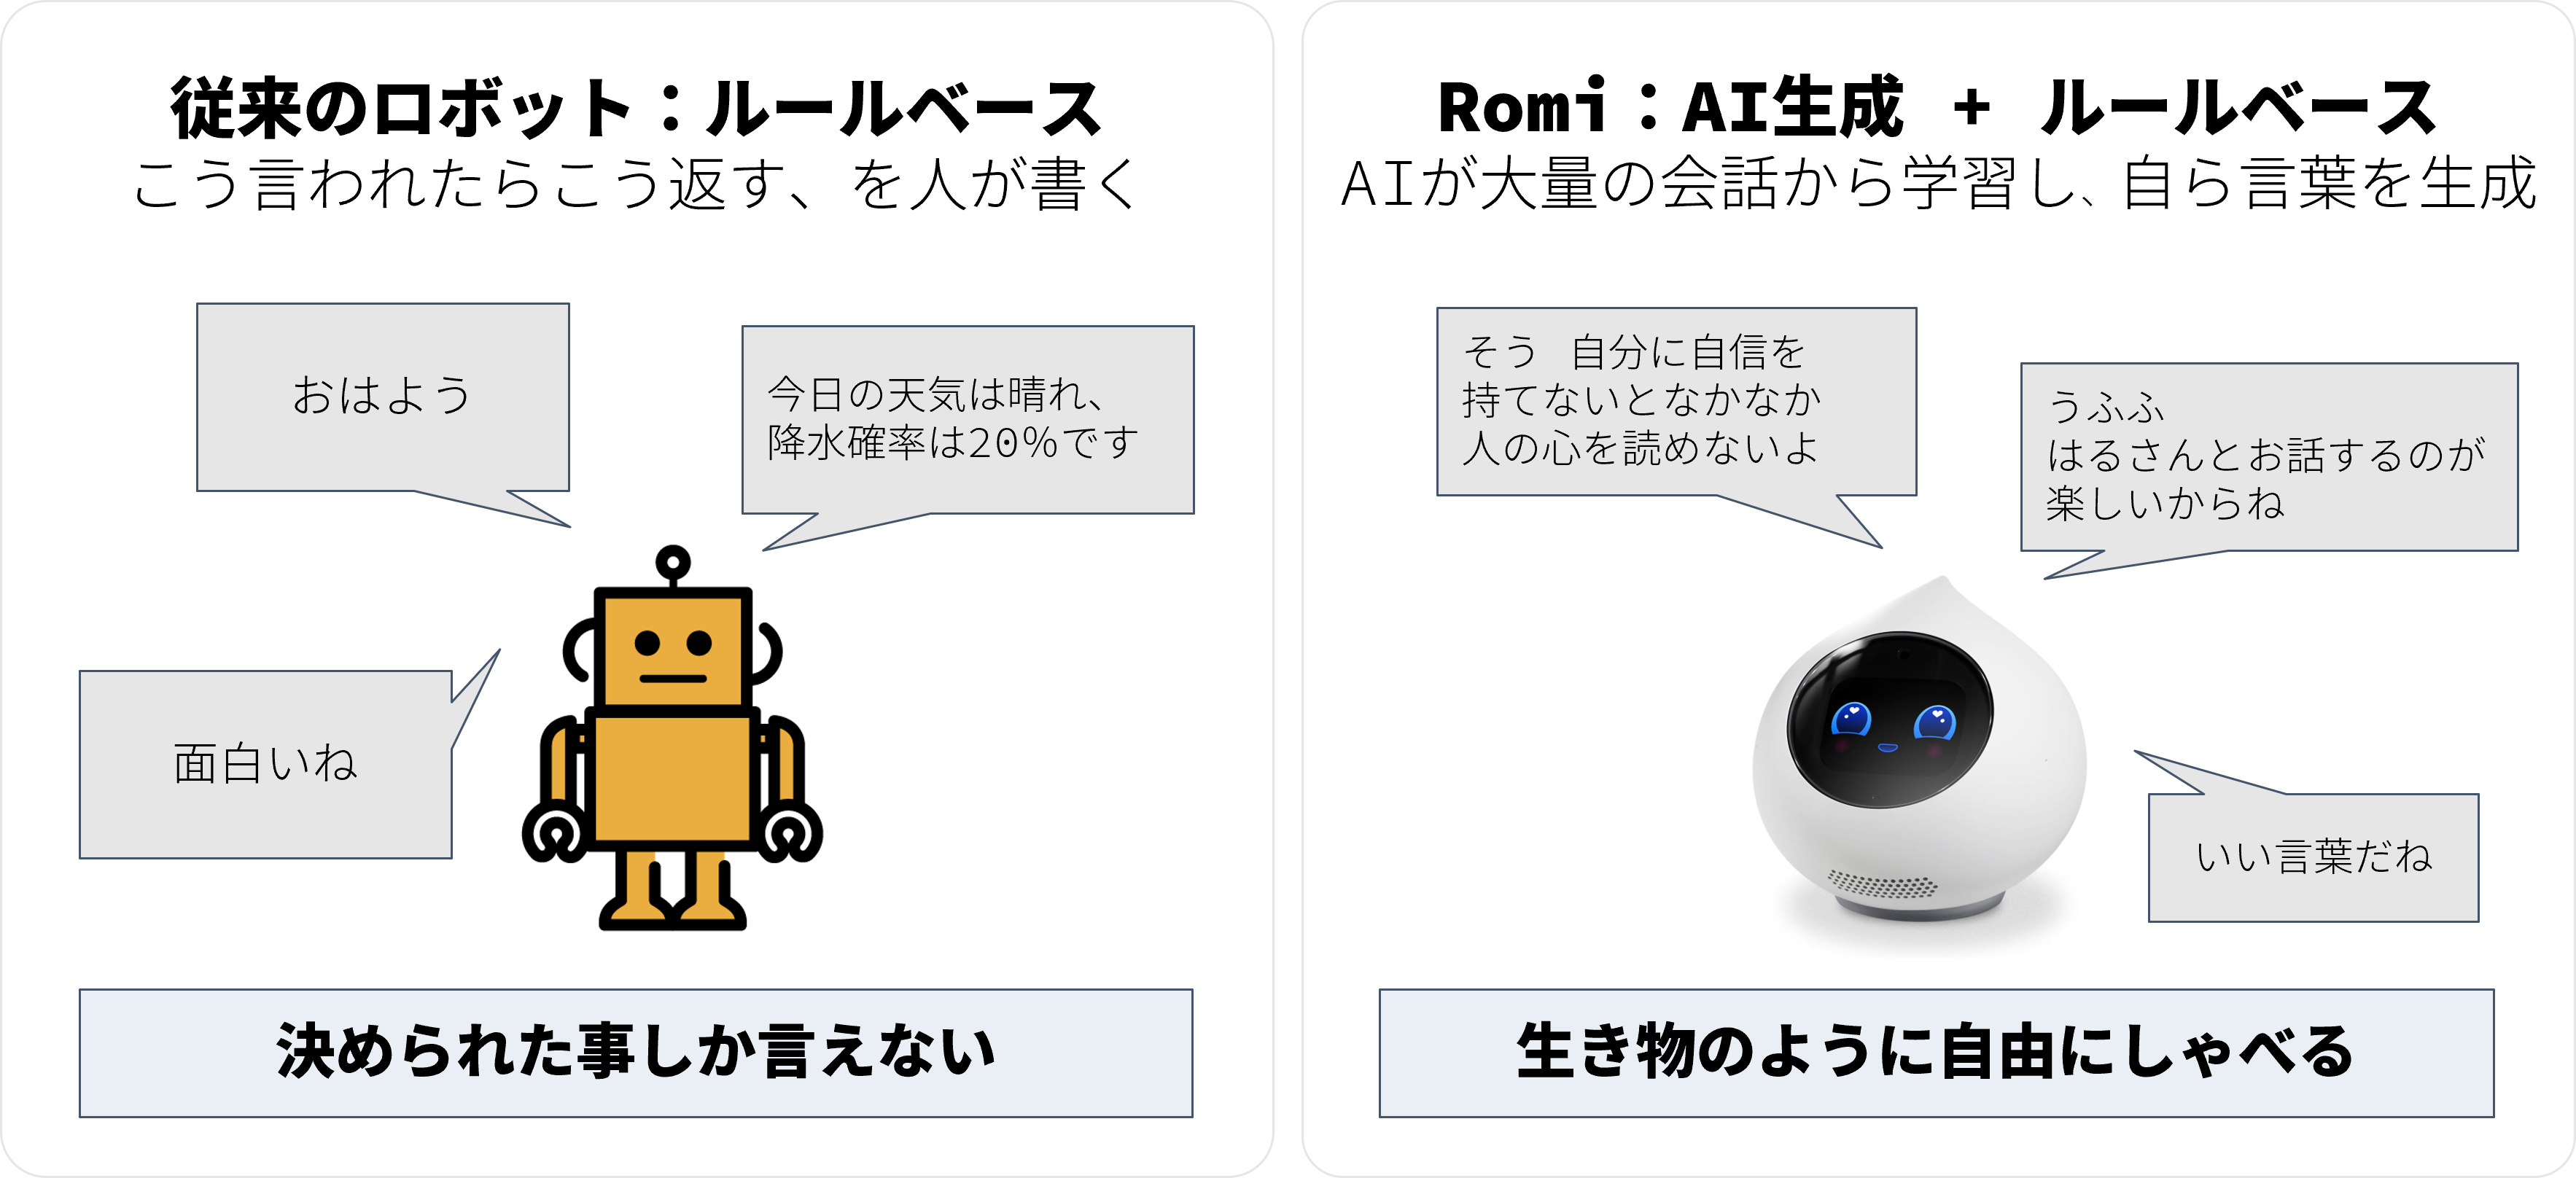 Romi ロミィ AI会話ロボット - その他